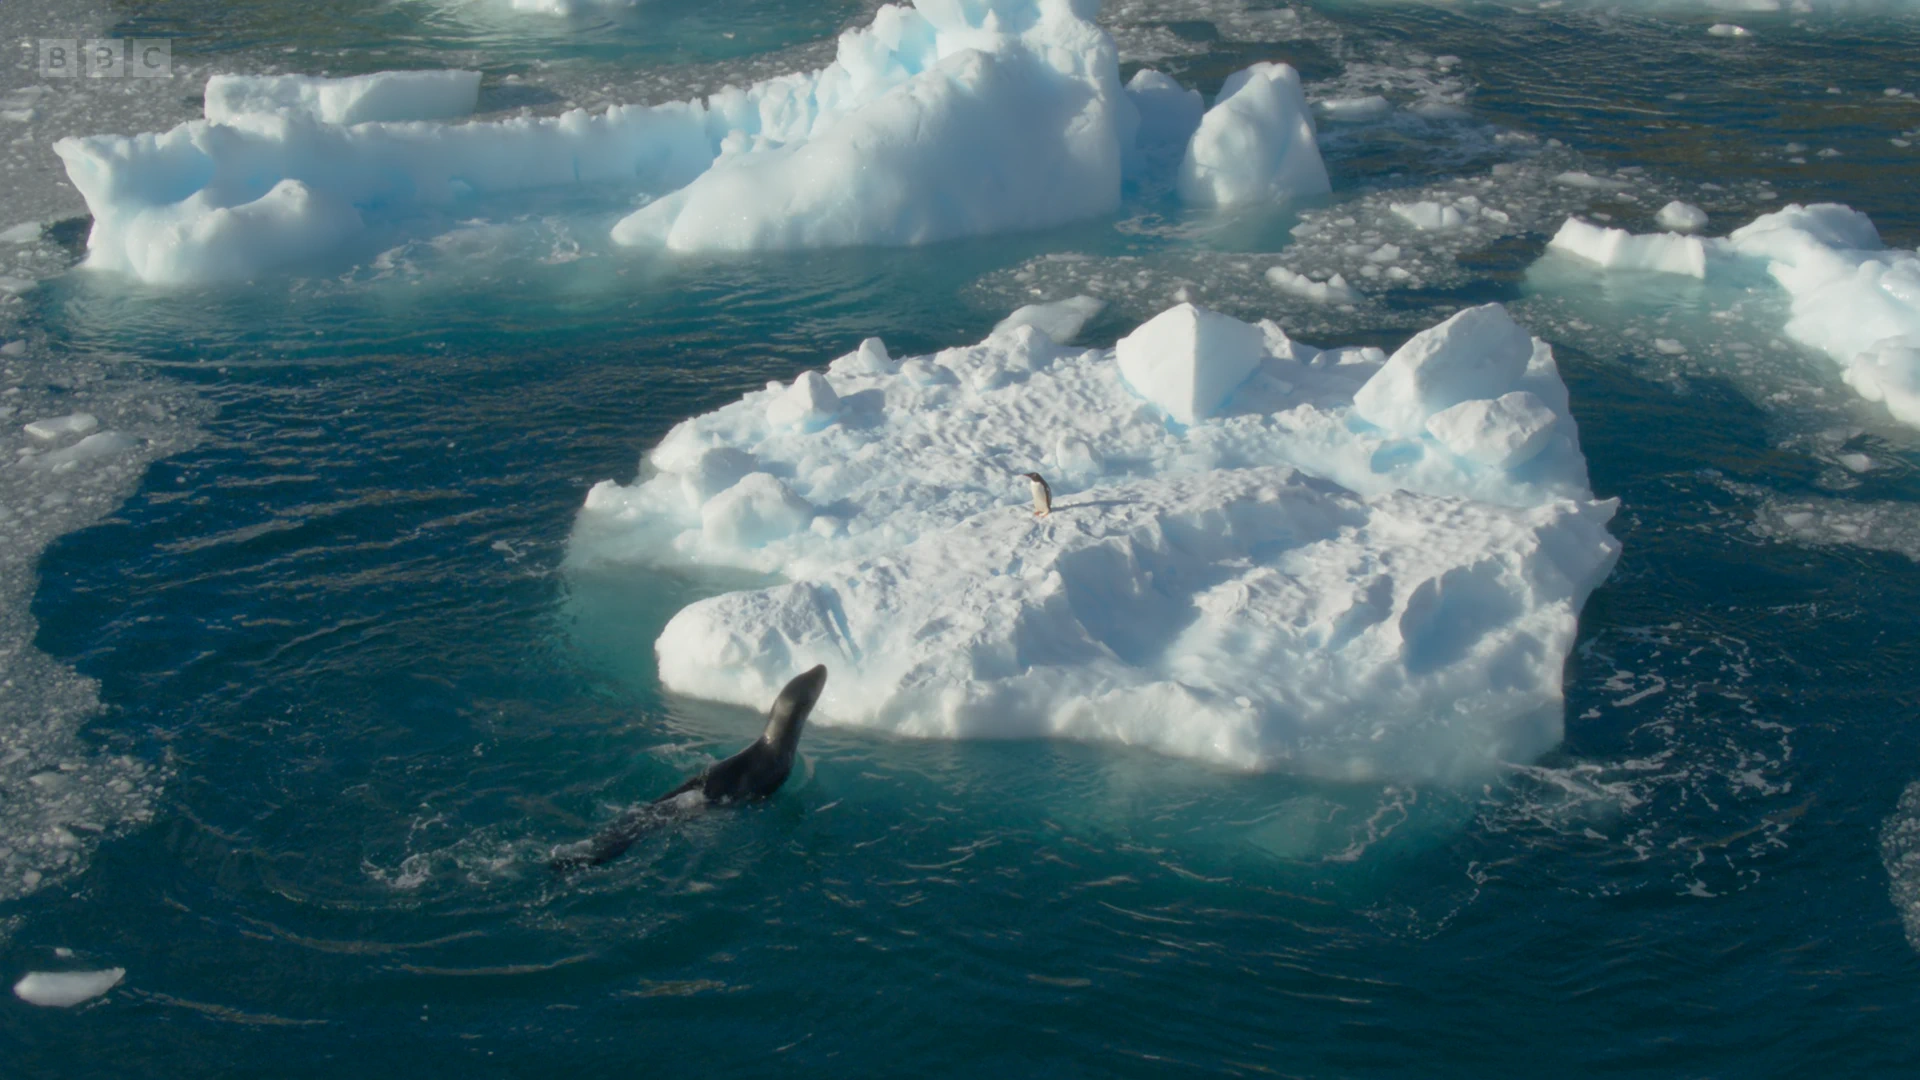 Leopard seal (Hydrurga leptonyx) as shown in Seven Worlds, One Planet - Antarctica